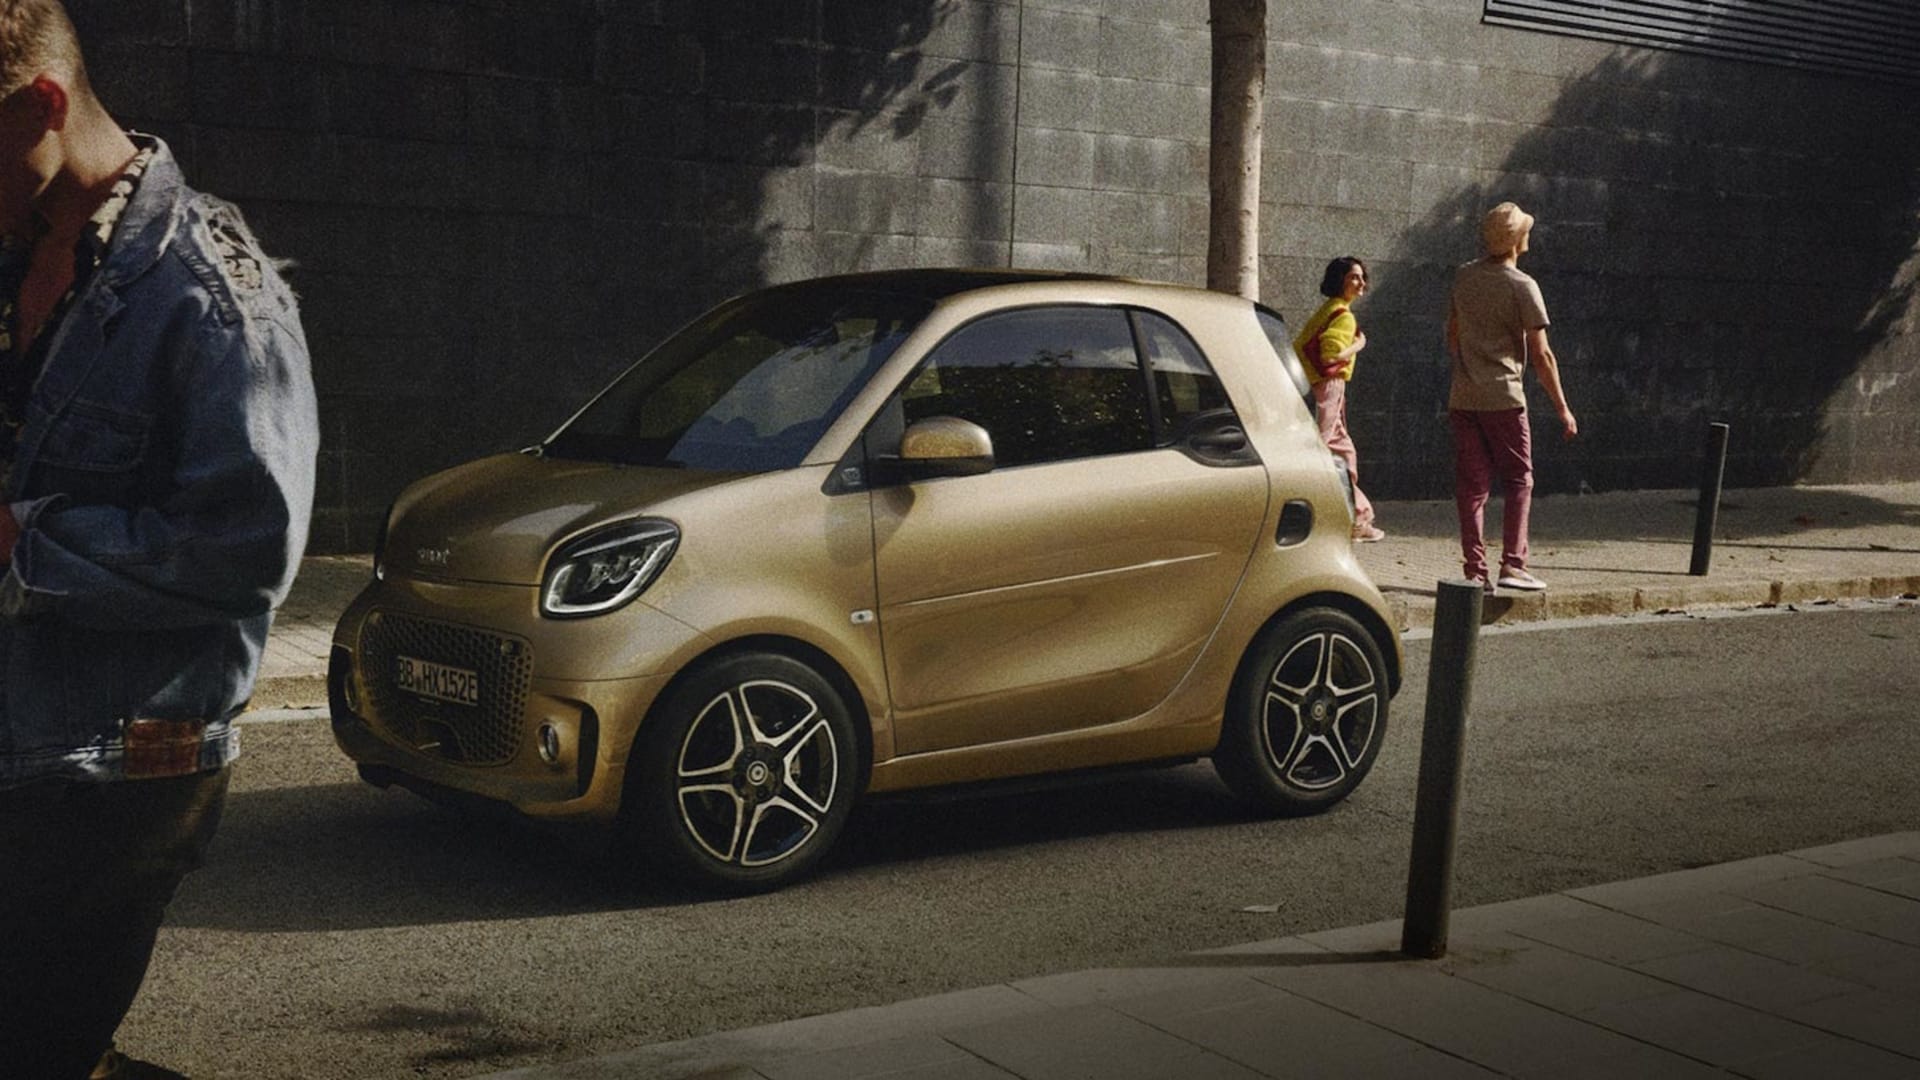 The new smart EQ fortwo.